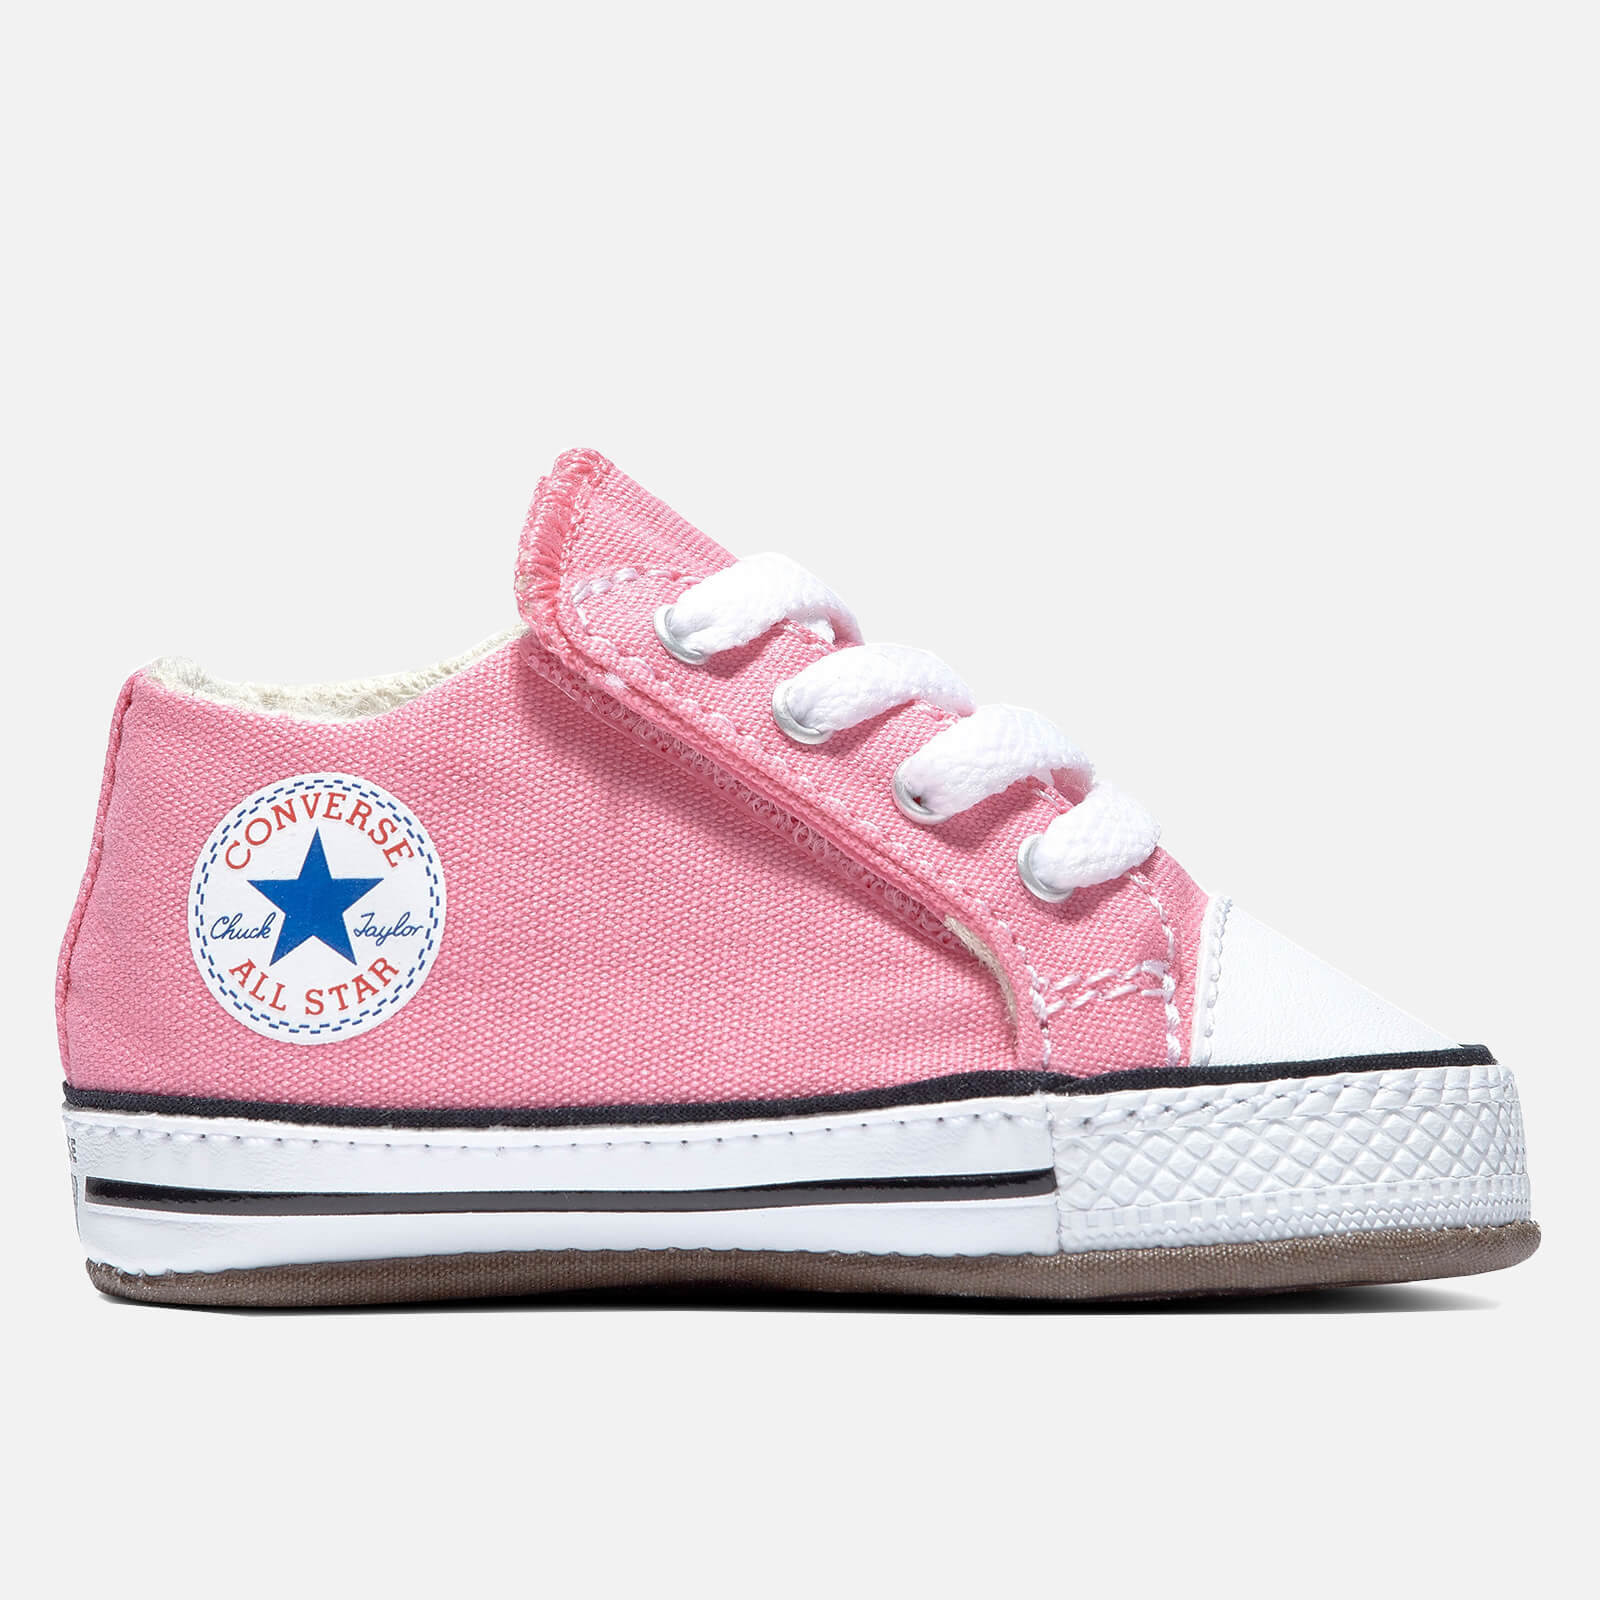 Converse Babies' Chuck Taylor All Star Cribster Soft Trainers - Pink - UK 1 Baby